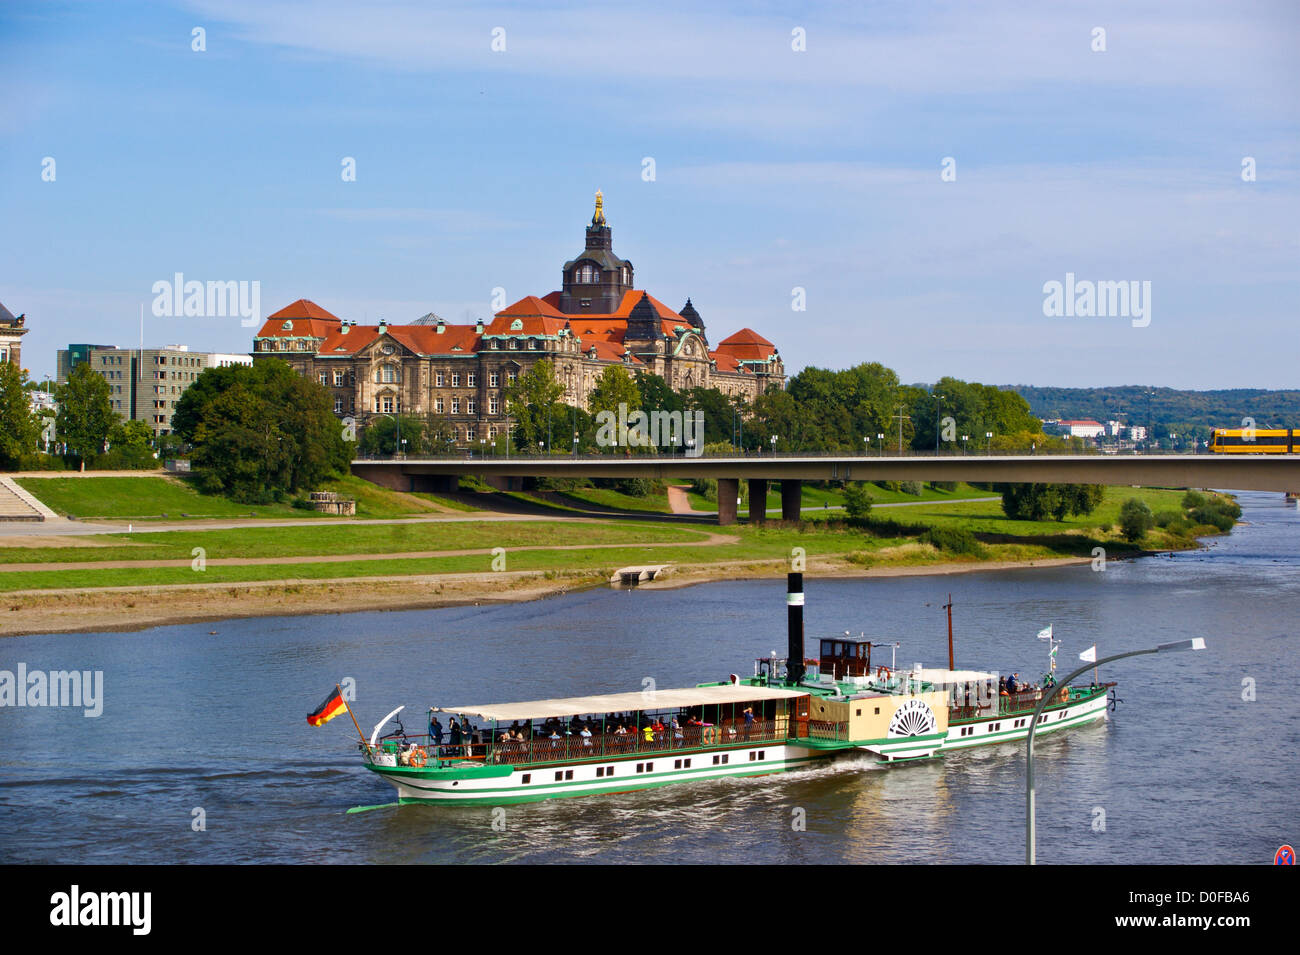 Japanisches Palais across the Elbe river, with a Weisse Flotte paddle steamer, Dresden, Sachsen, Saxony, Germany Stock Photo